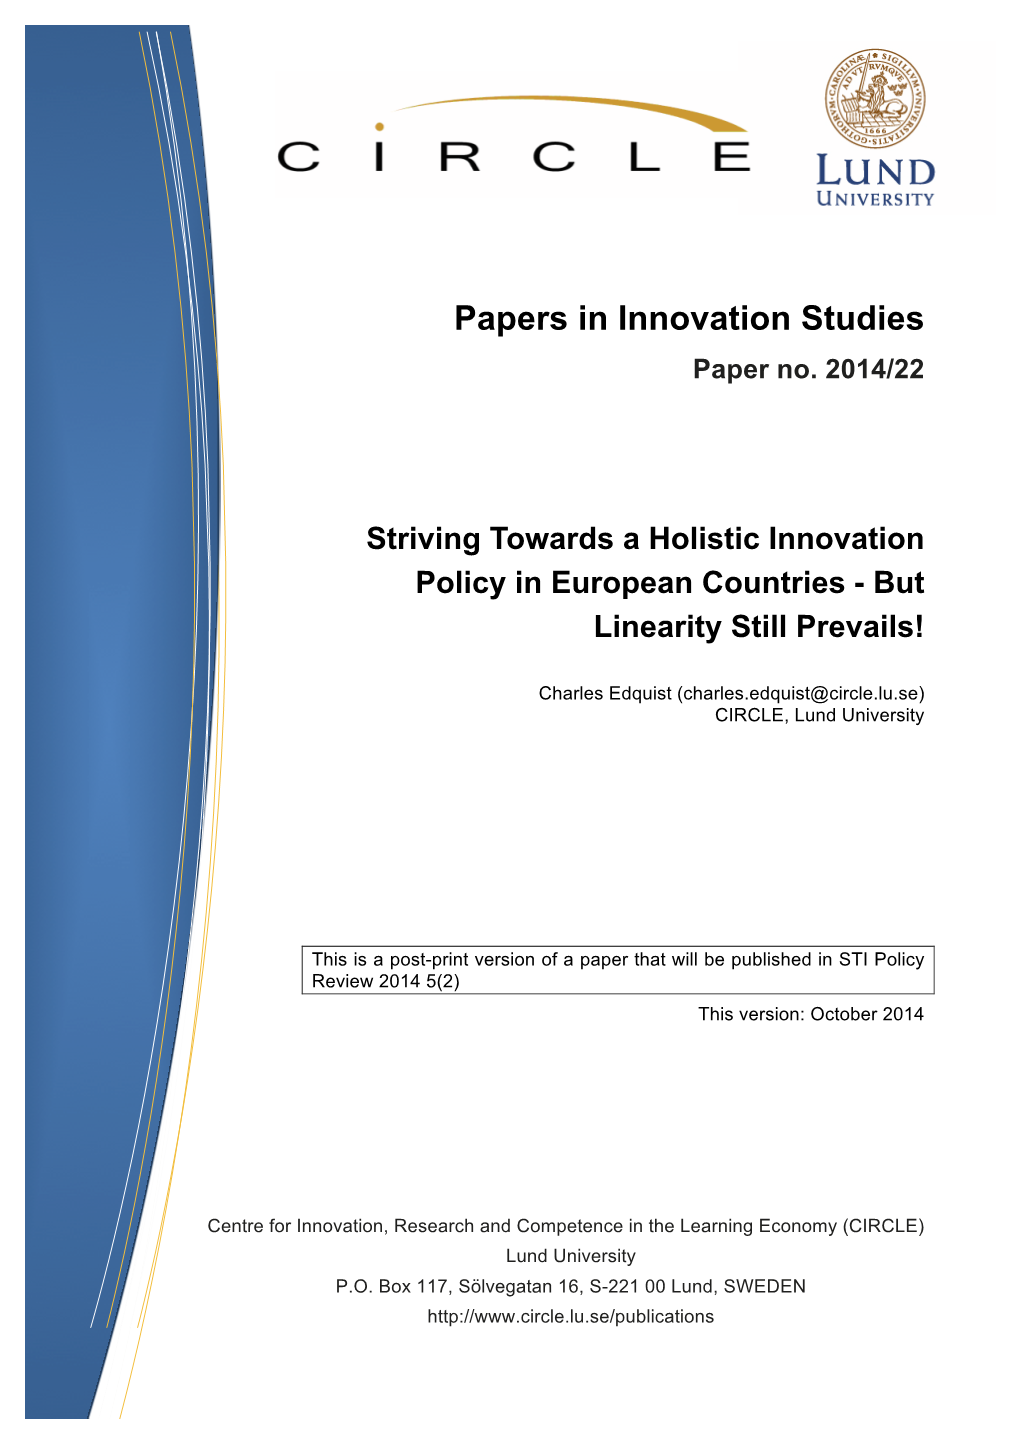 Papers in Innovation Studies Paper No